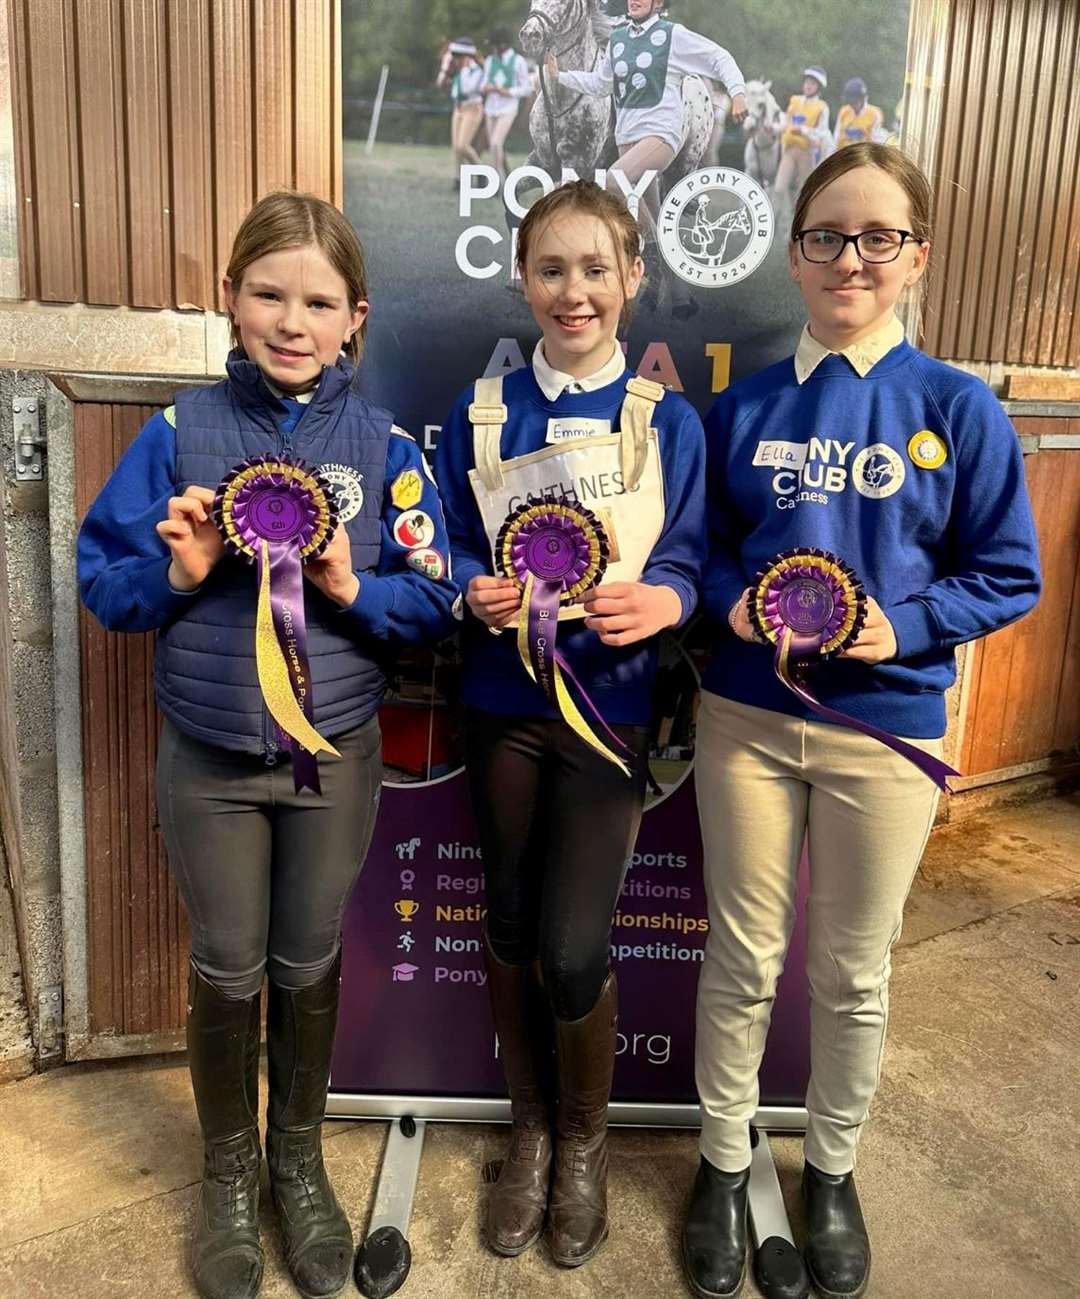 Erica Pottinger, Emmie Maclean and Ella Budge, the sixth-placed junior team.